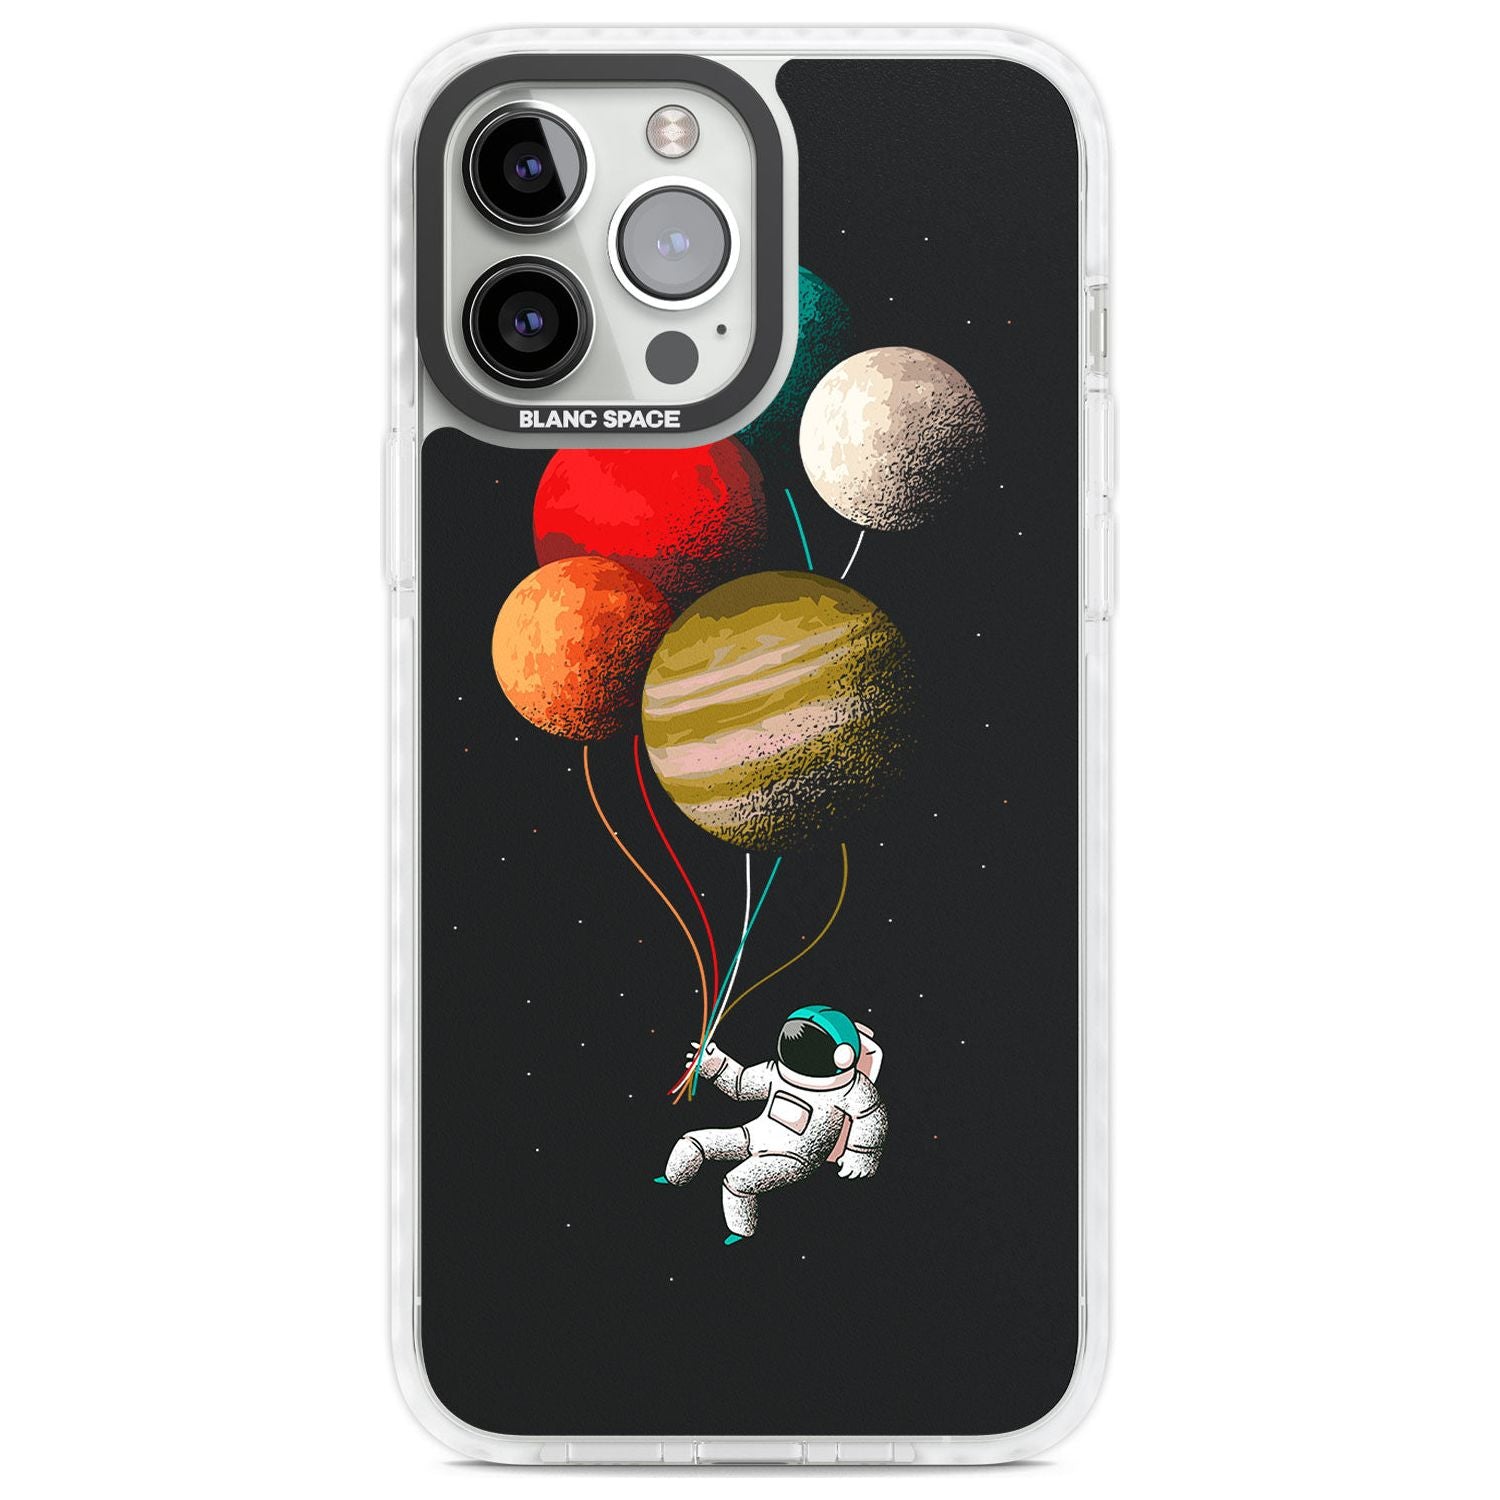 Astronaut Balloon Planets Phone Case iPhone 13 Pro Max / Impact Case,iPhone 14 Pro Max / Impact Case Blanc Space